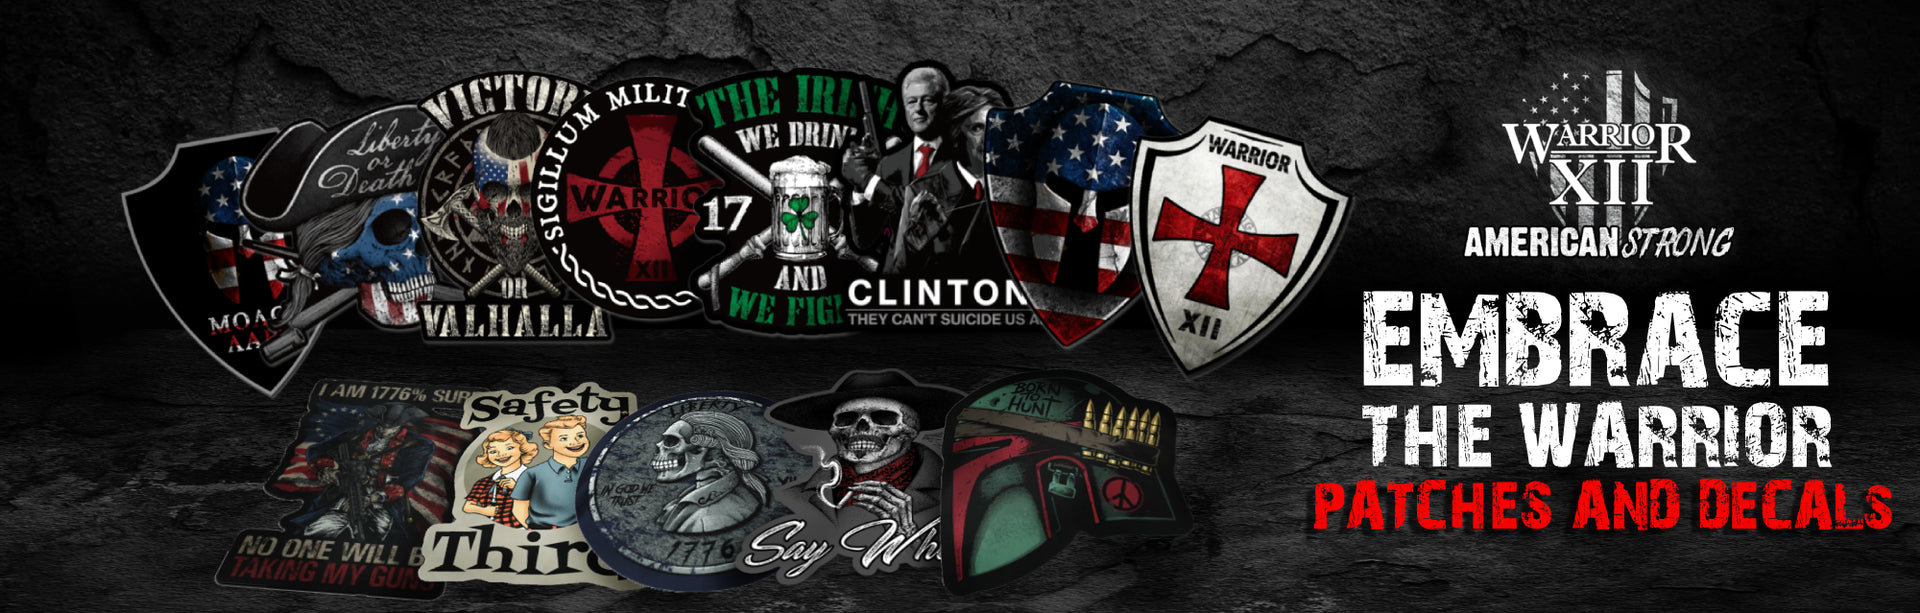 Decals & Patches